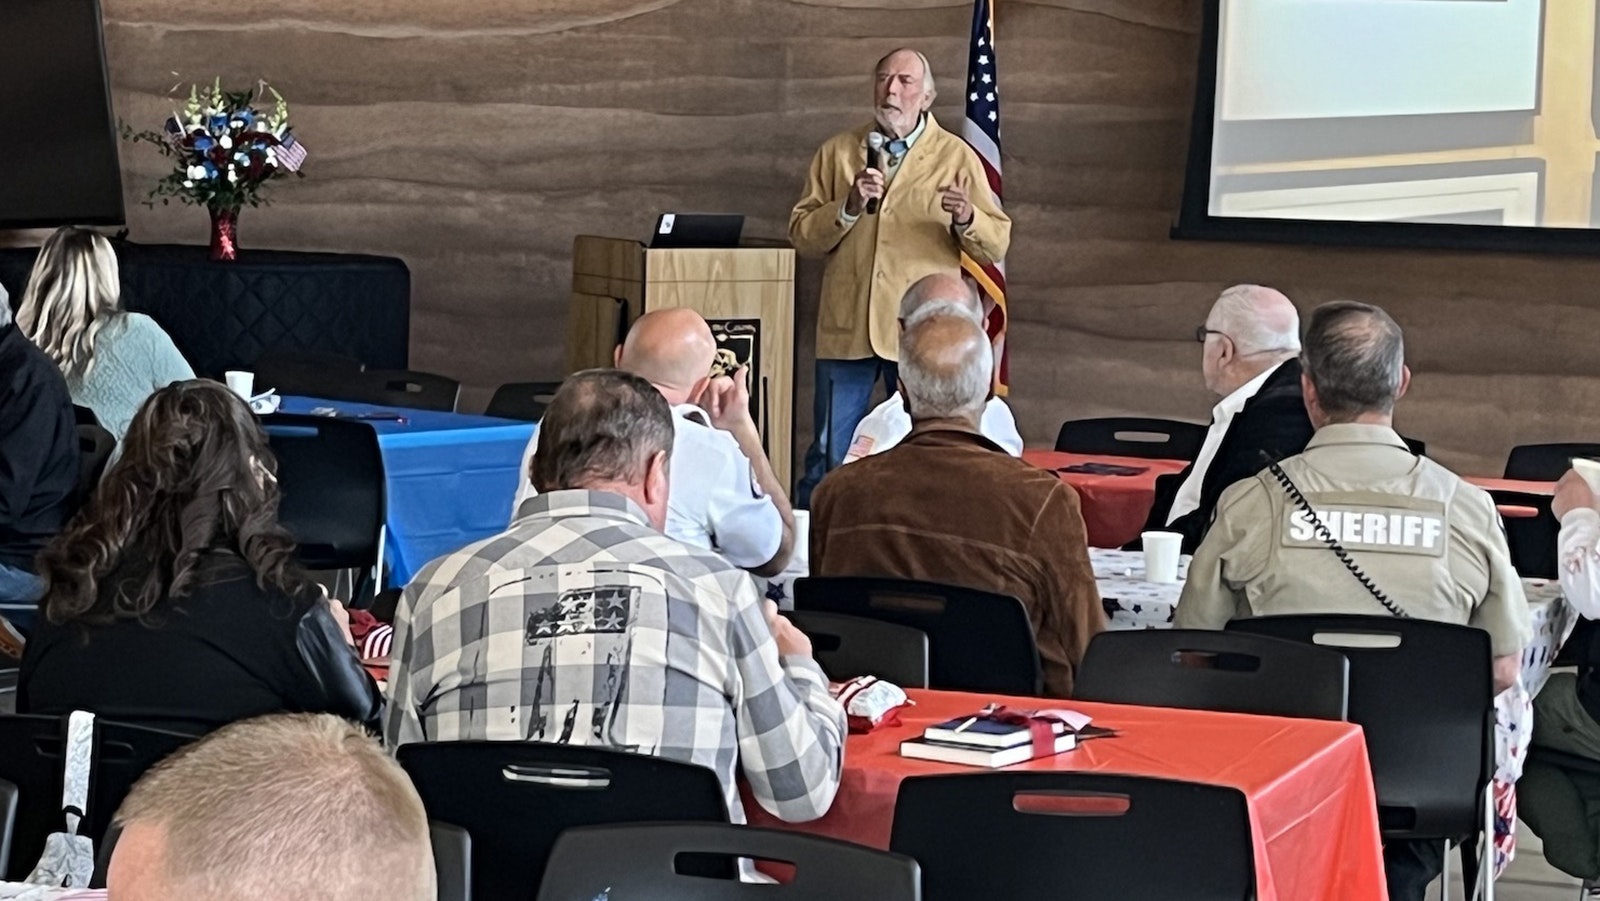 Maj. Drew Dix makes remarks at a special luncheon for veterans and first responders at the Sublette County Library in Pinedale on April 30.